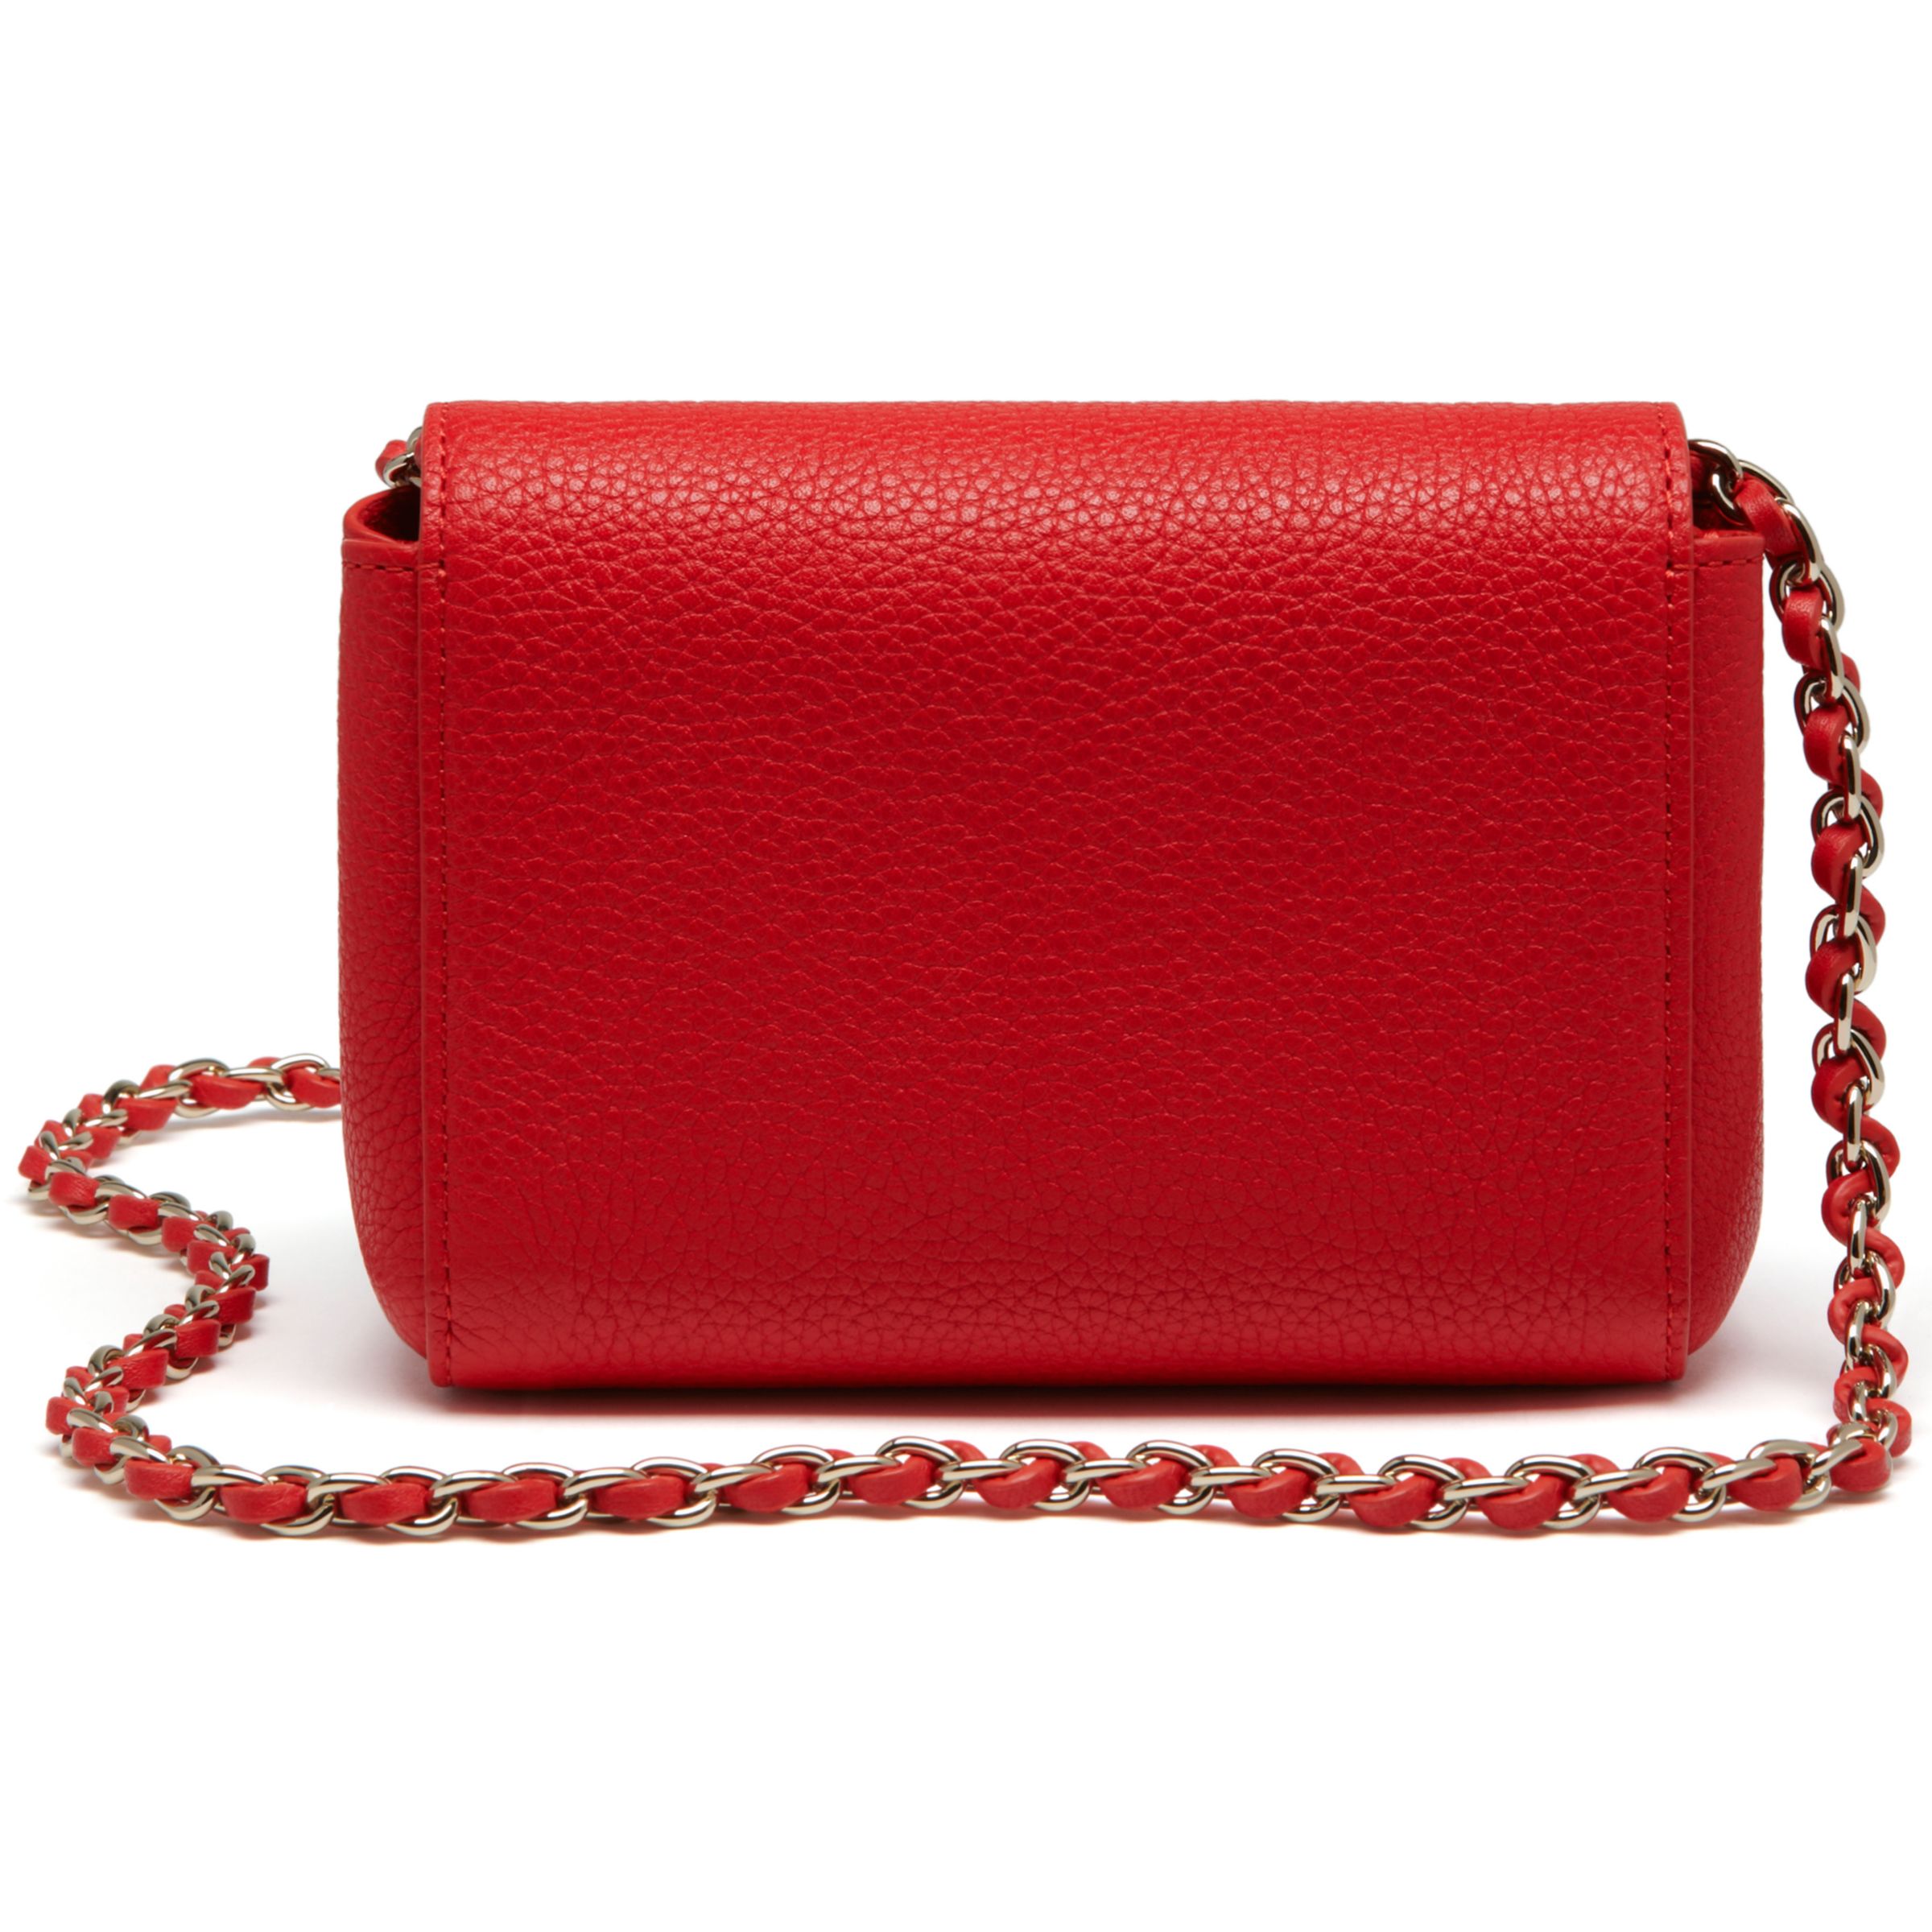 Mulberry Mini Lily Classic Grain at John Lewis & Partners